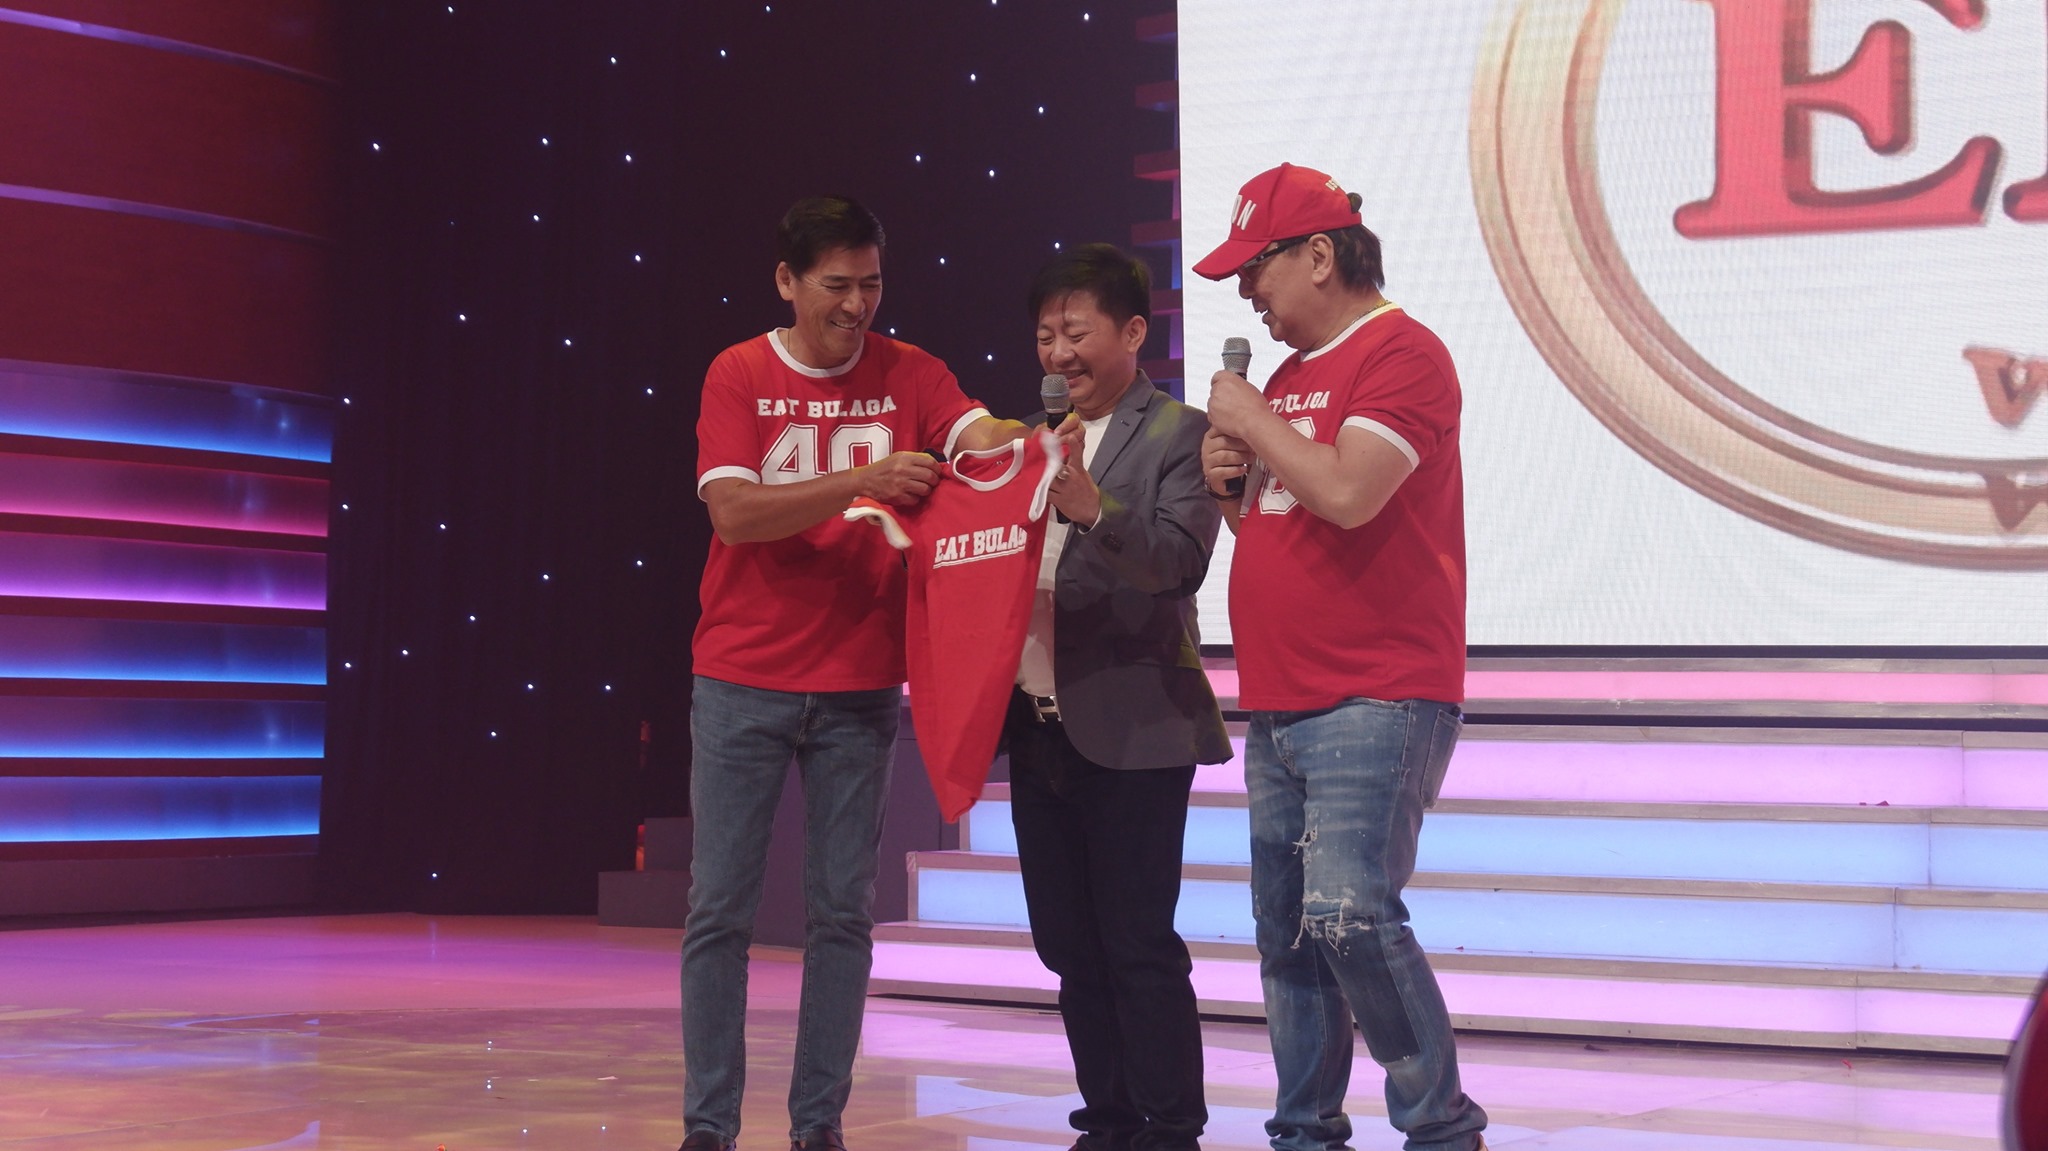 MYANMAR BOUND. Vic Sotto and Joey de Leon present a red Eat Bulaga t-shirt to Captain Aung Po who will handle the Myanmar franchise of the show. Photo form Facebook/Eat Bulaga 